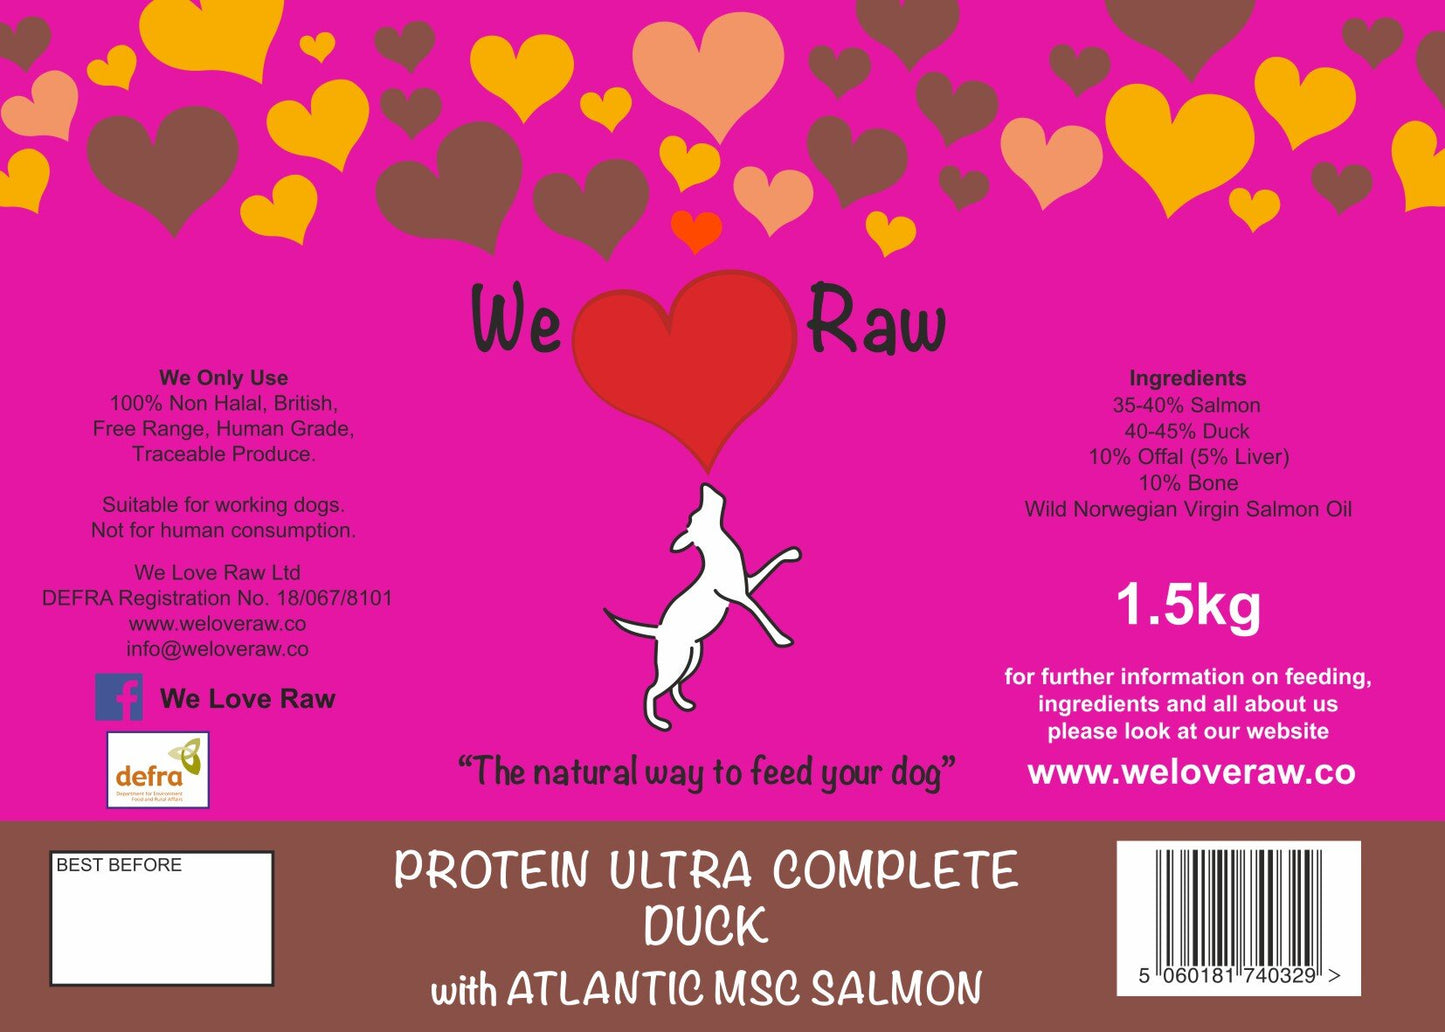 Protein Ultra Complete: Duck with Atlantic MSC Salmon